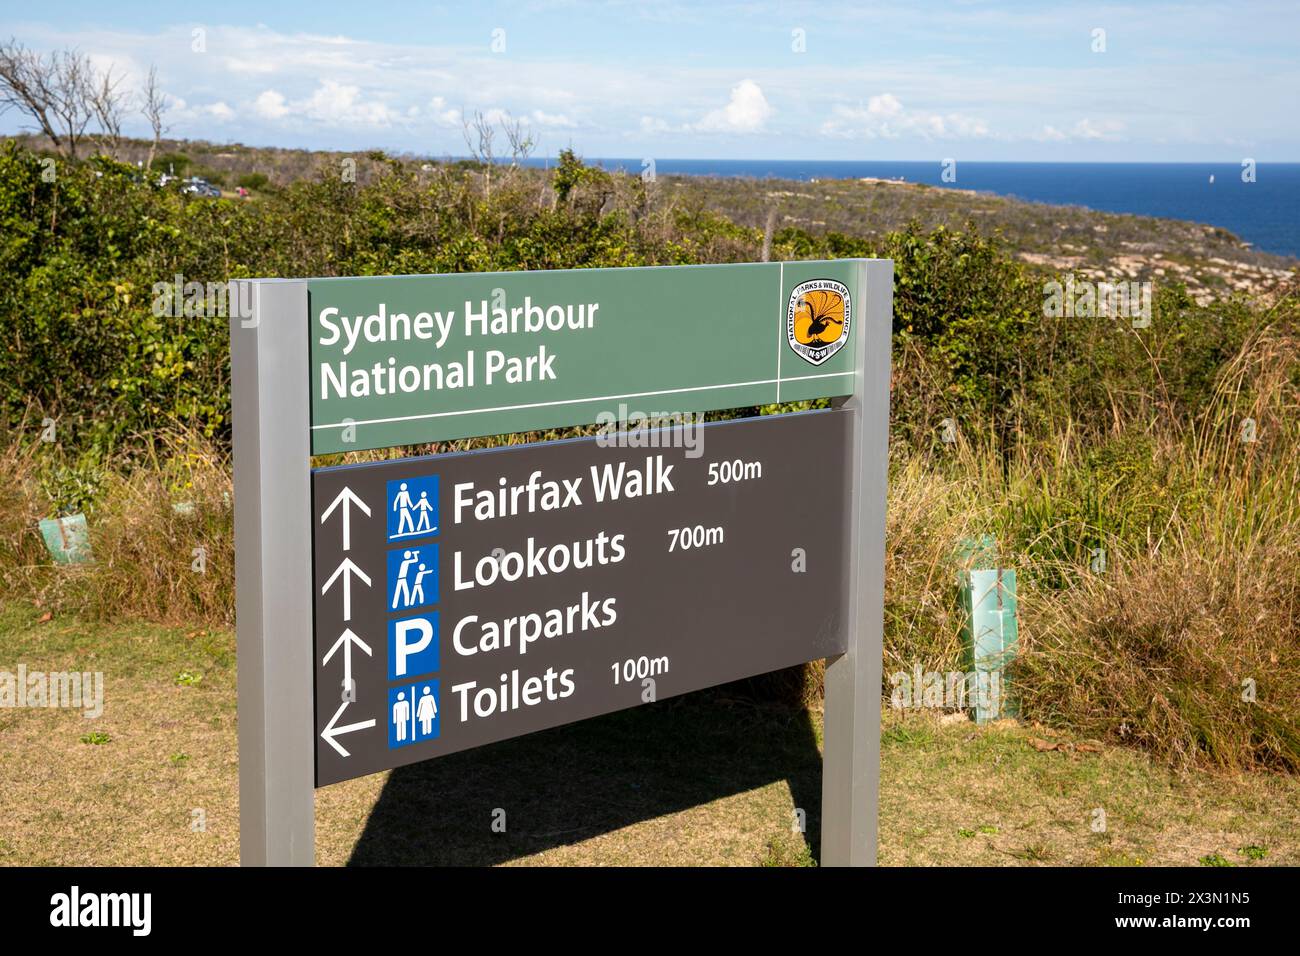 Sydney Harbour national park sign on North Head Manly with directions to Fairfax track walk and lookouts,Sydney,NSW,Australia Stock Photo